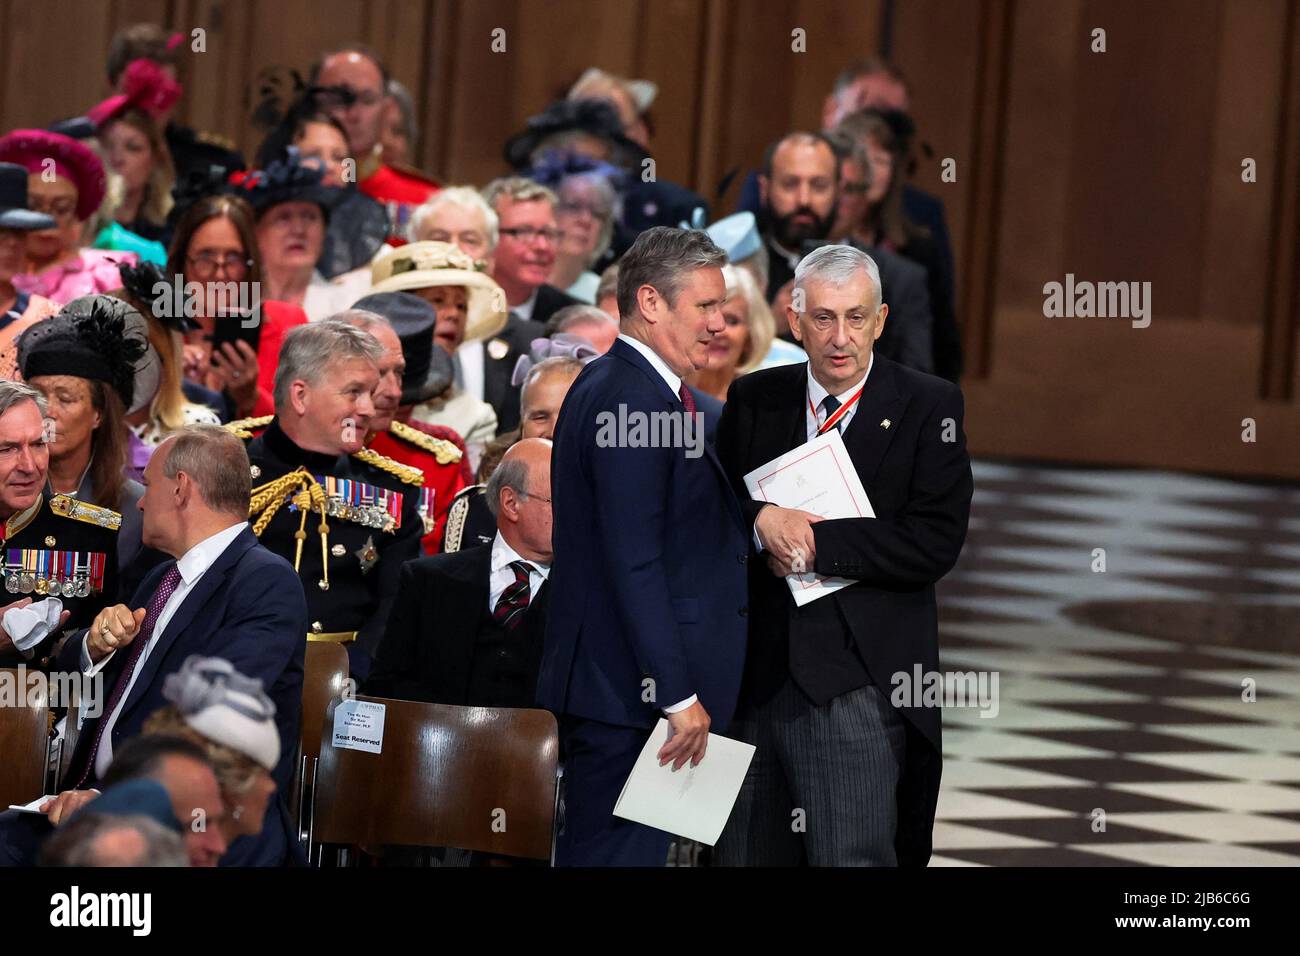 Labour leader Keir Starmer (left) and Speaker of the House of Commons Sir Lindsay Hoyle arriving for the National Service of Thanksgiving at St Paul's Cathedral, London, on day two of the Platinum Jubilee celebrations for Queen Elizabeth II. Picture date: Friday June 3, 2022. Stock Photo